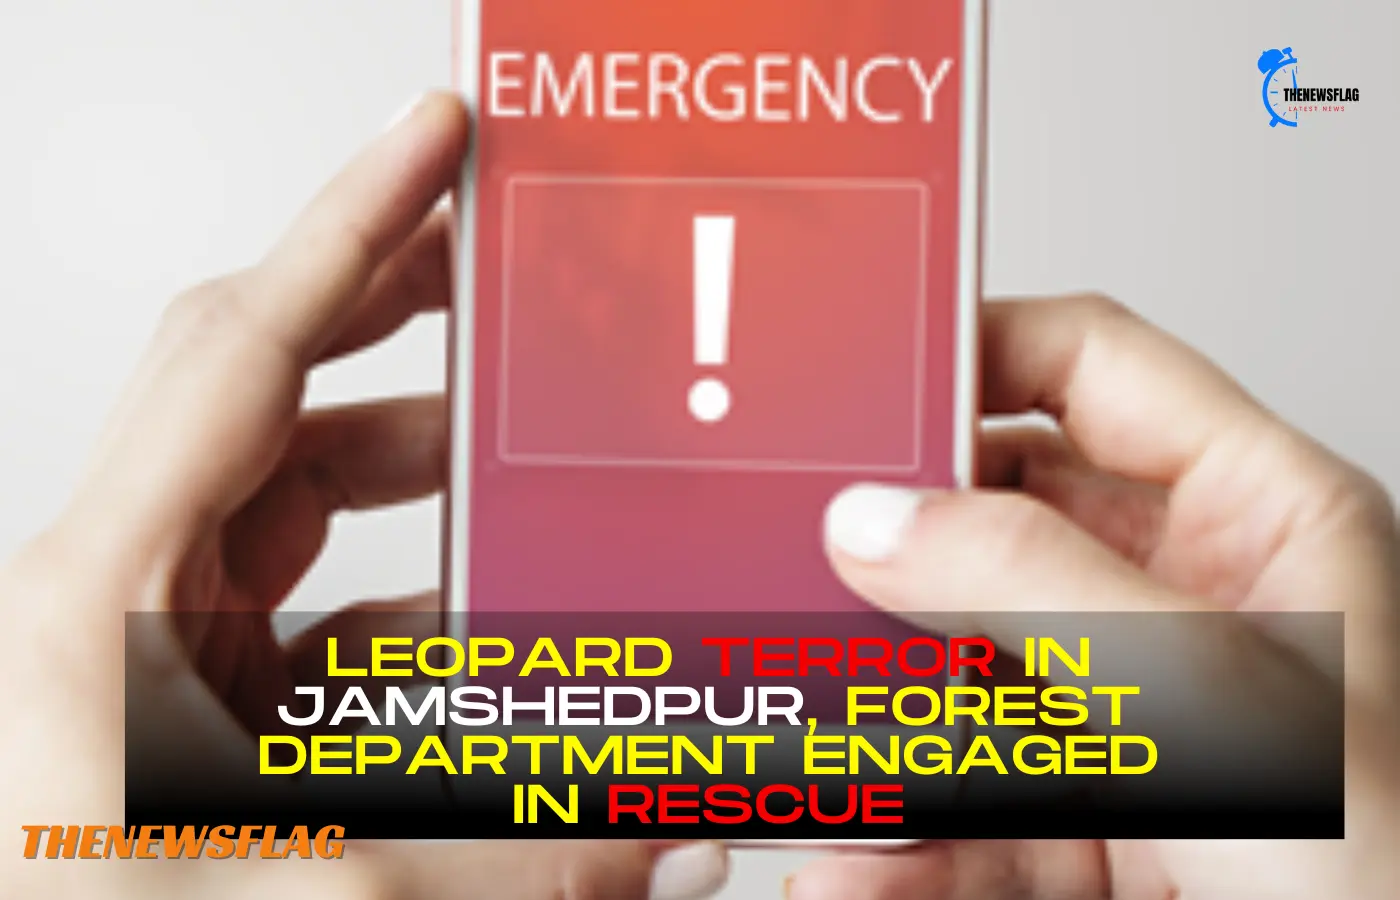 Leopard terror in Jamshedpur, forest department engaged in rescue